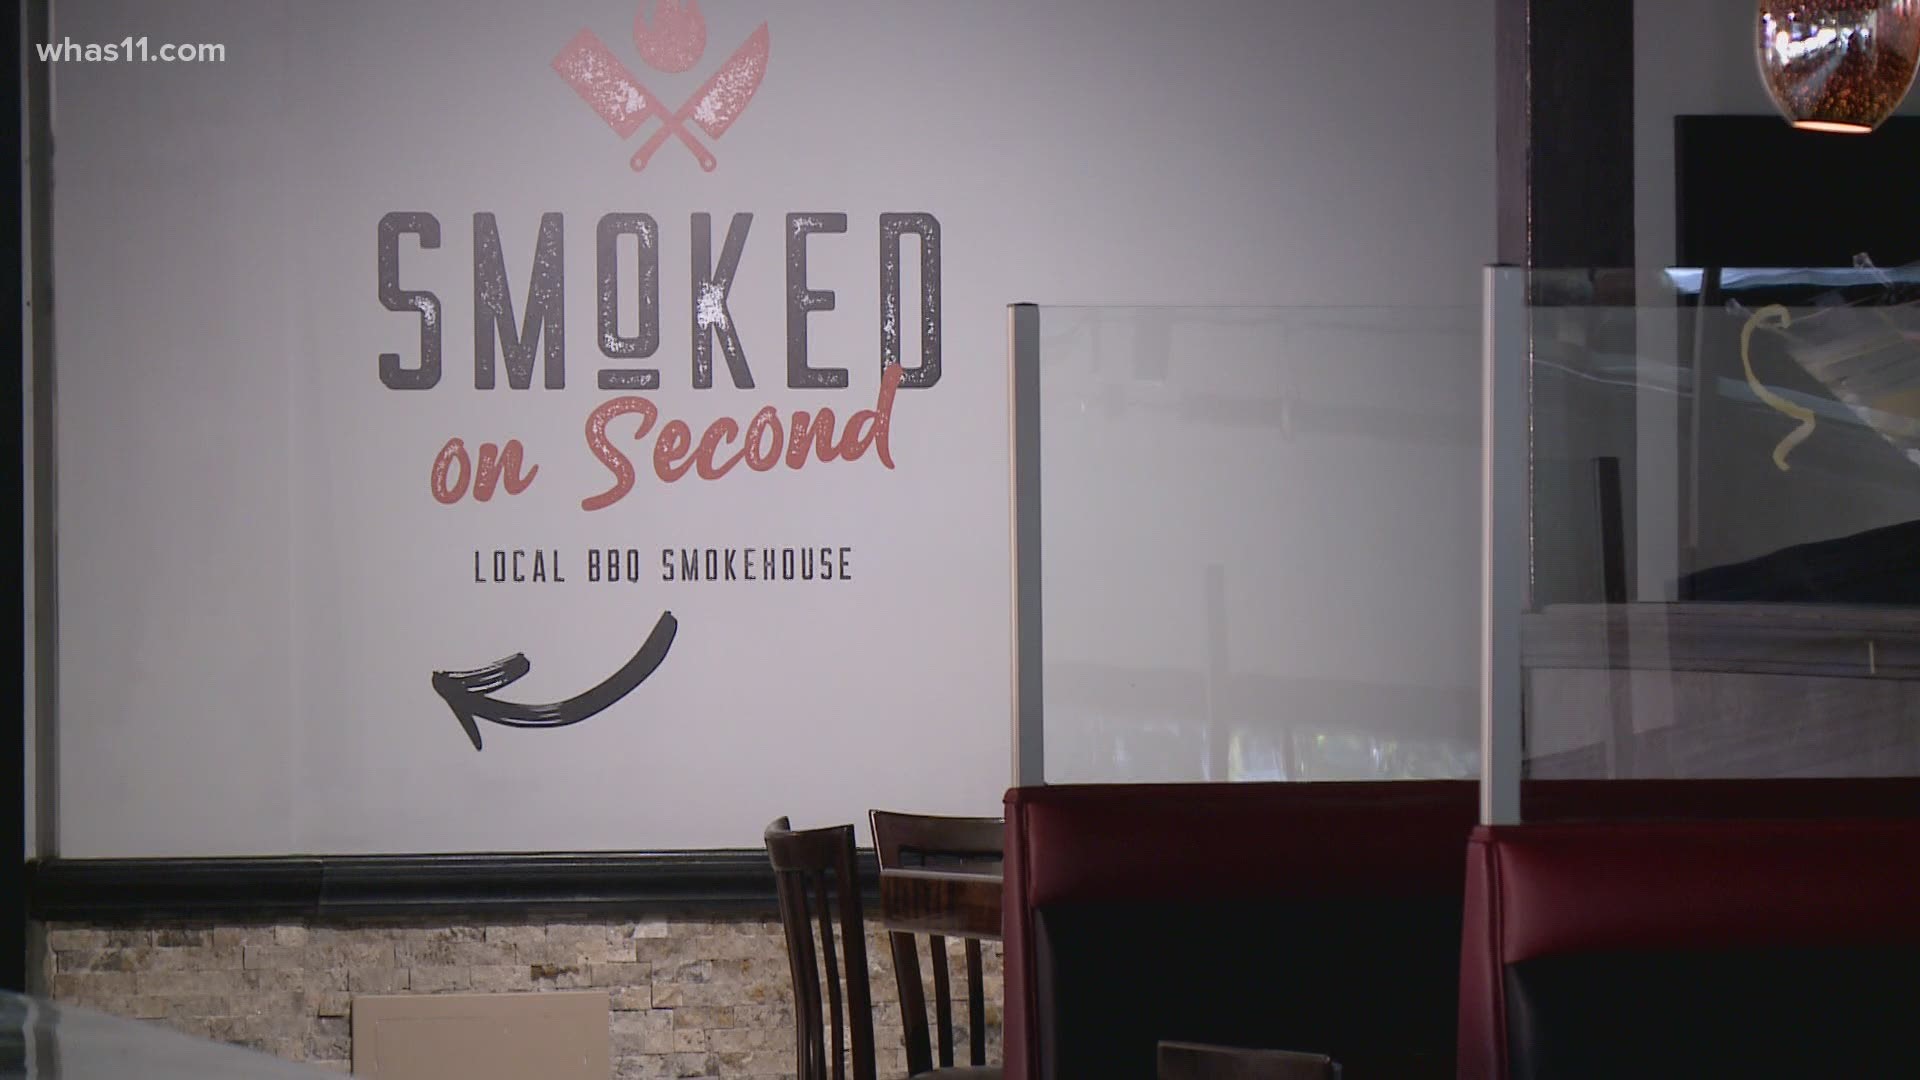 Two new restaurants open in Downtown Louisville | whas11.com